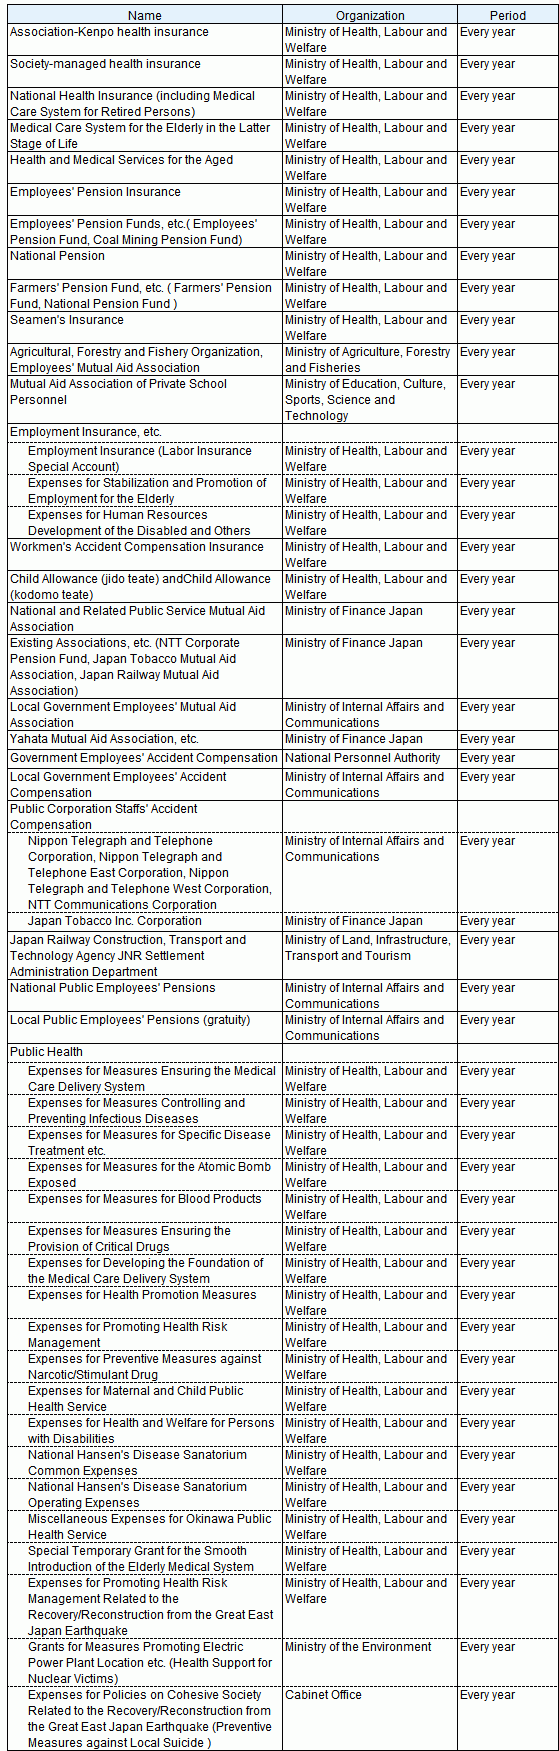 Schemes common to the OECD and ILO standards.